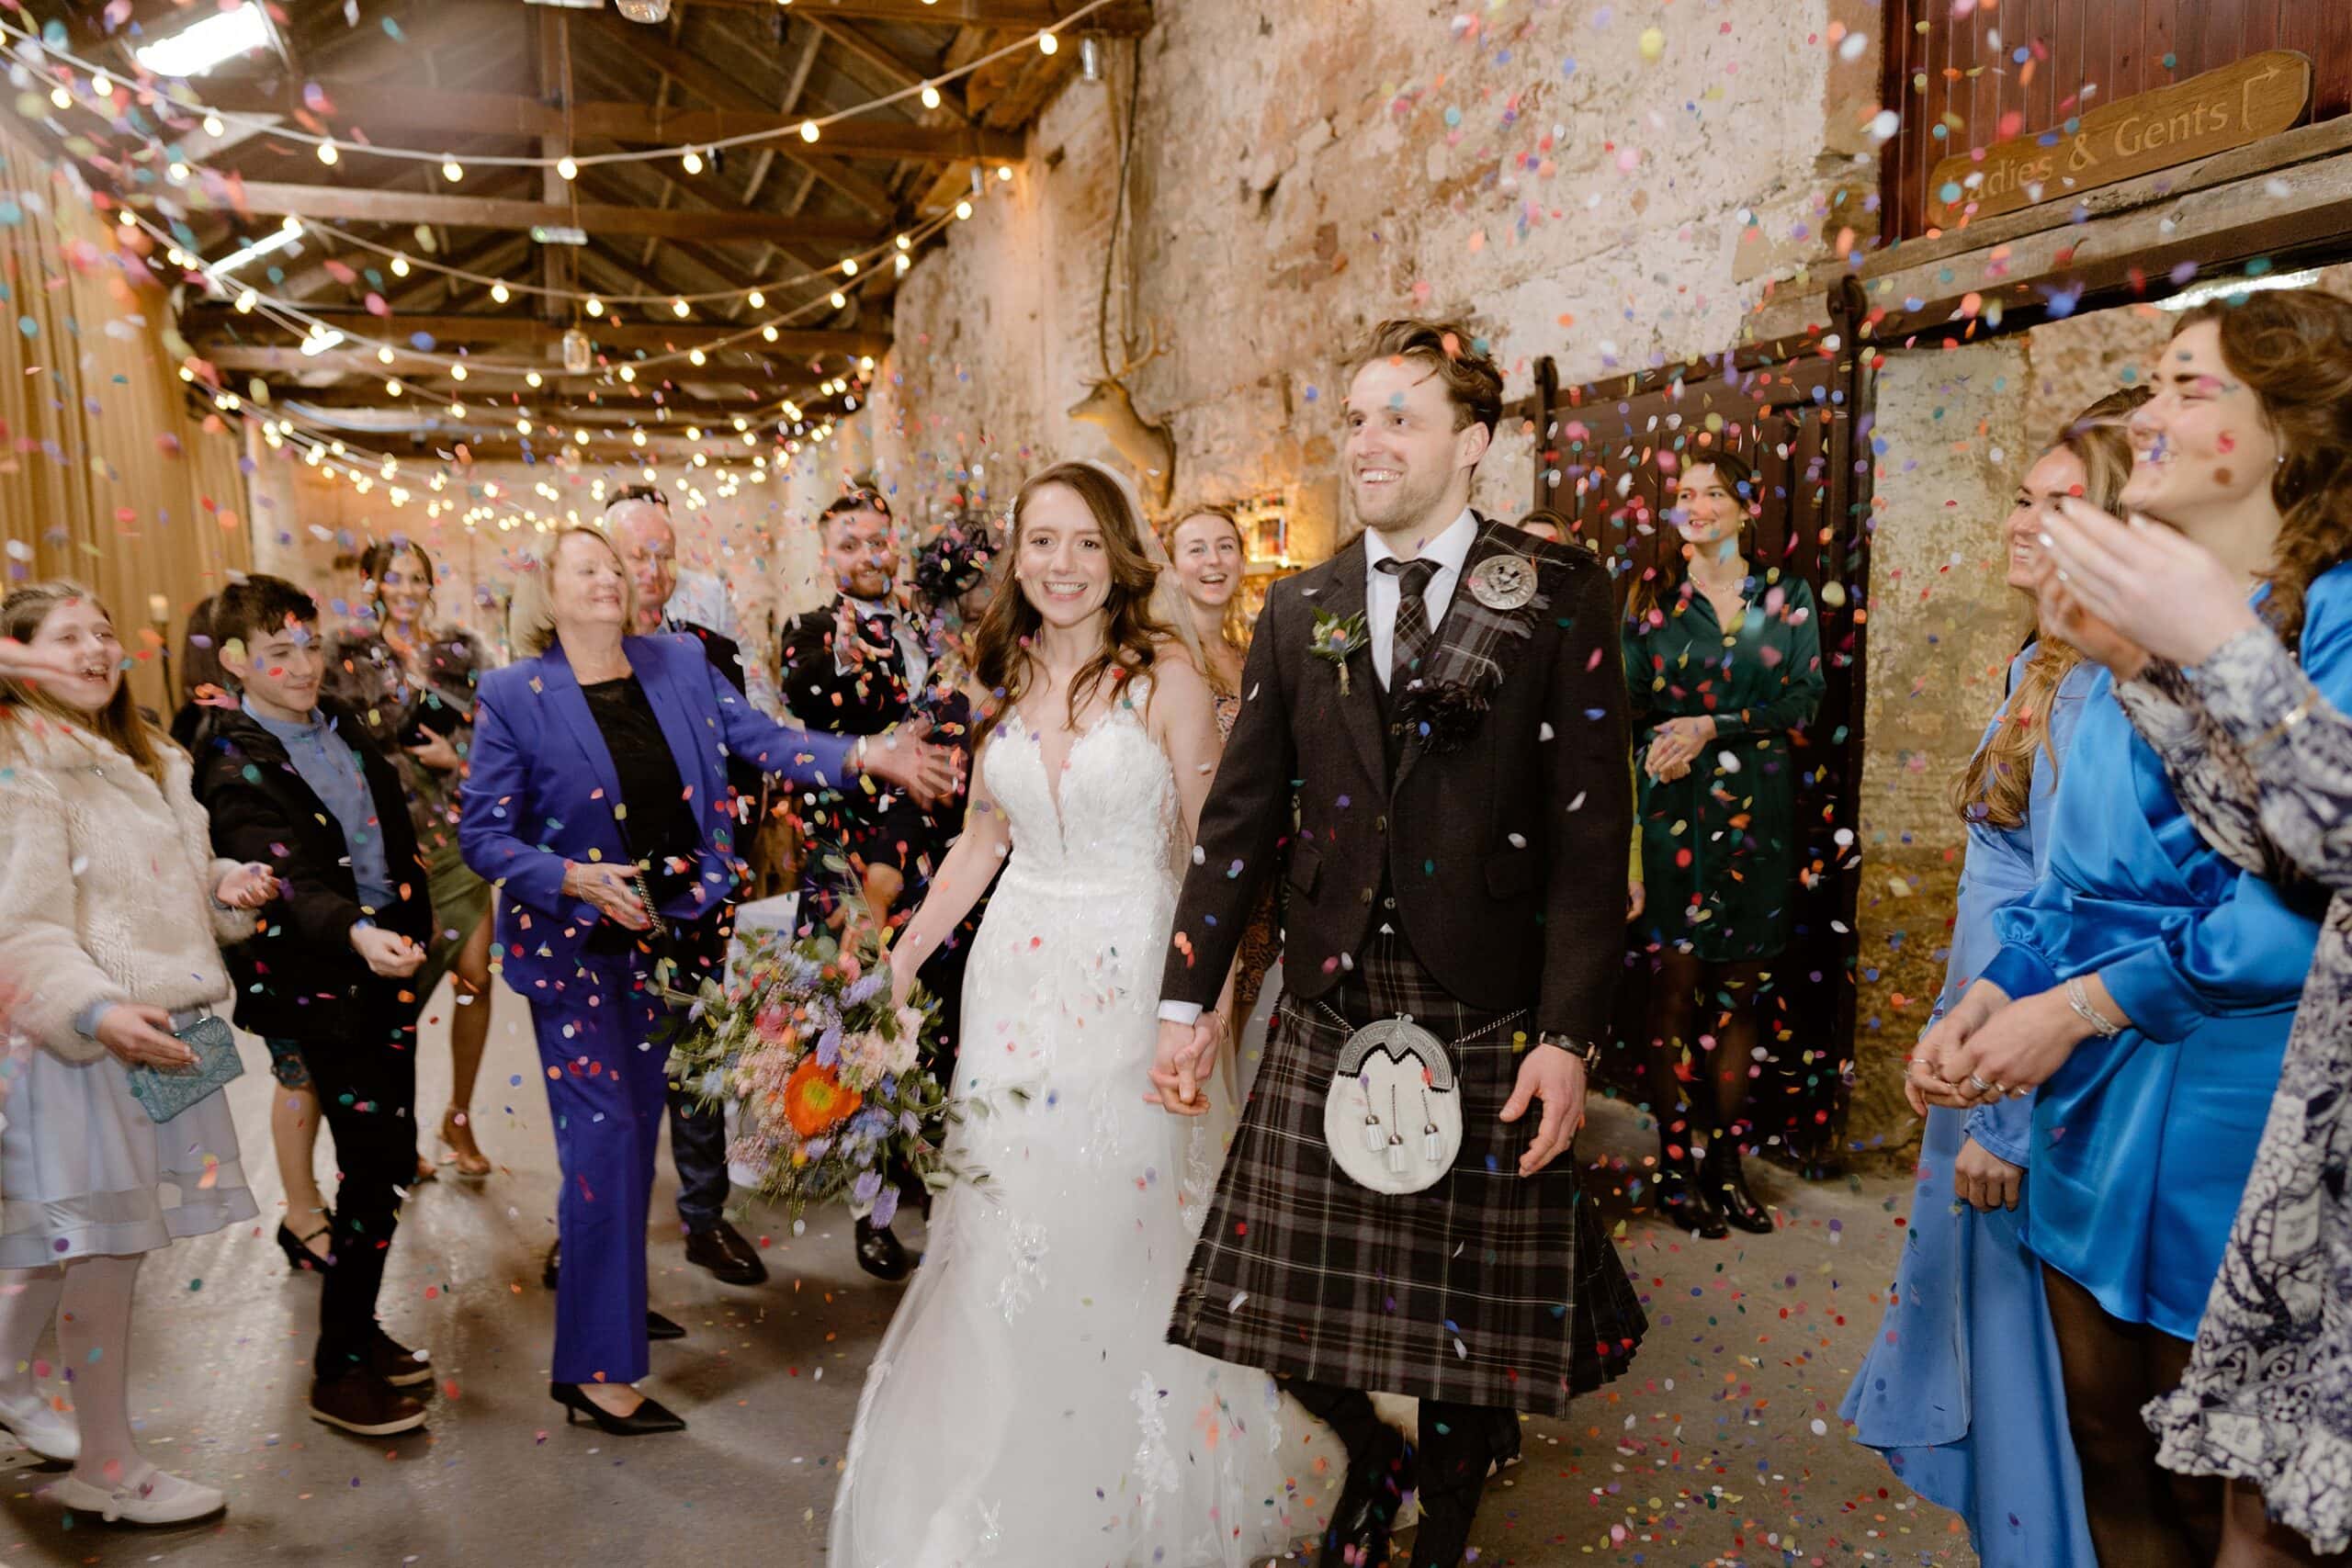 the bride and groom hold hands and smile as guests toss confetti beneath festoon lights following their wedding ceremony captured by st andrews wedding photographer